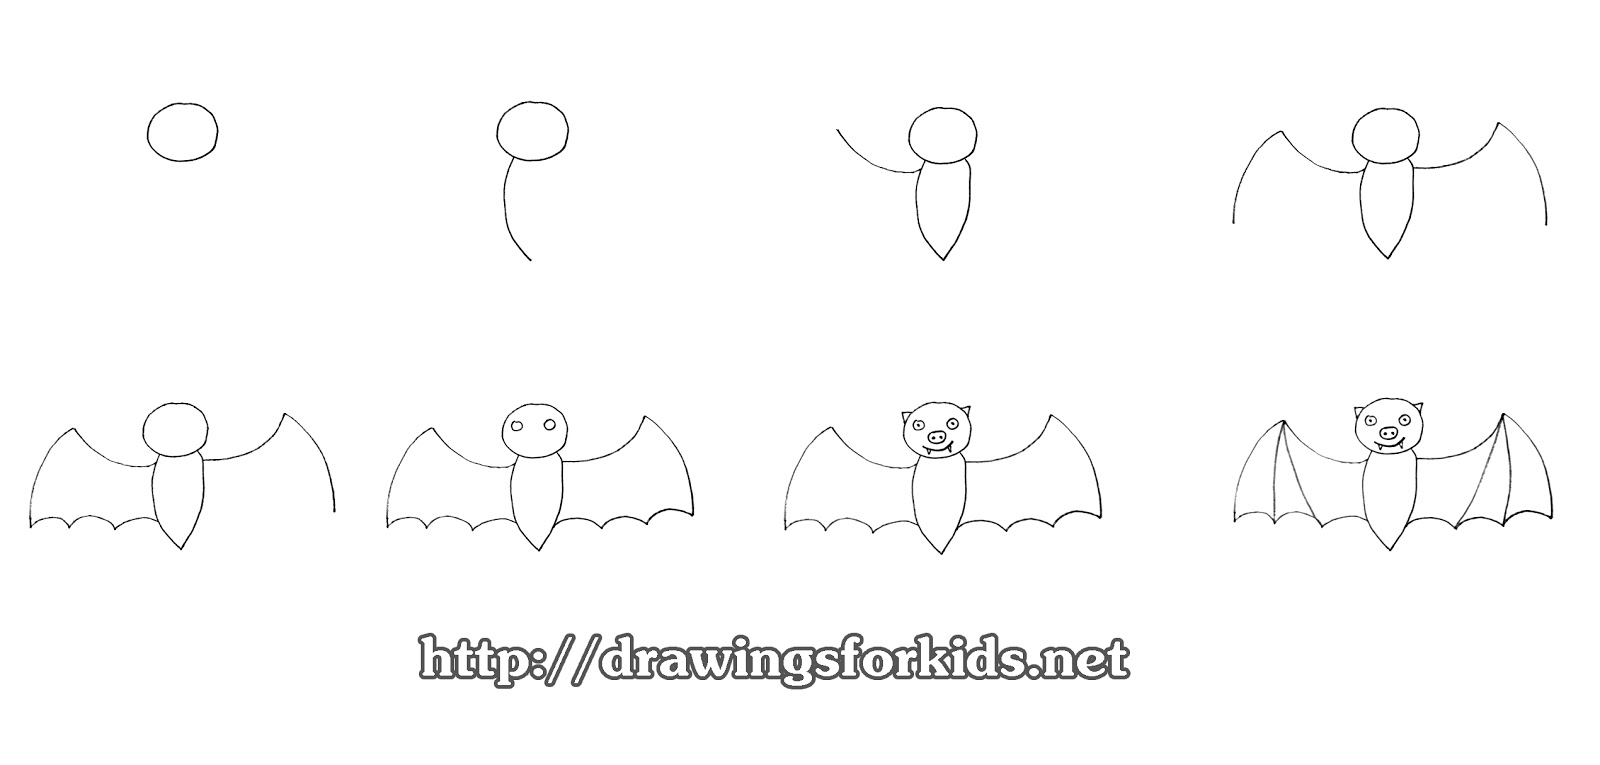 How to draw a bat for kids - drawingsforkids.net